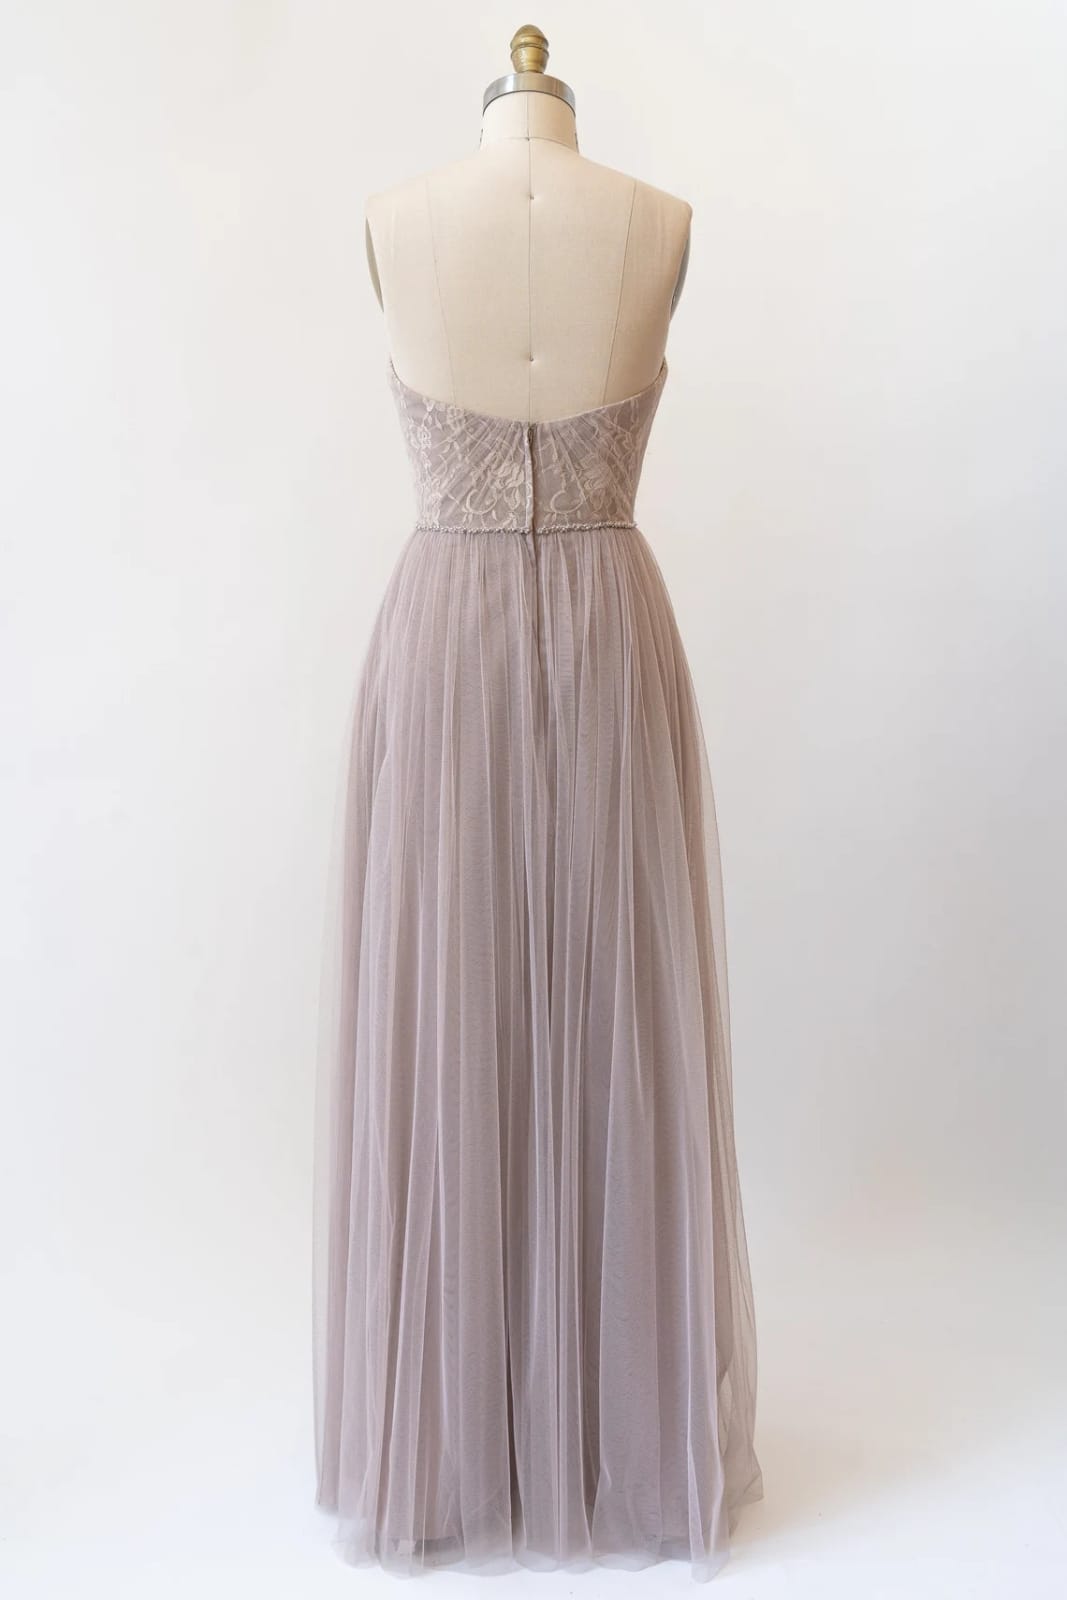 Sweetheart Grey Lace Tulle Long Strapless Bridesmaid Dress, Beads